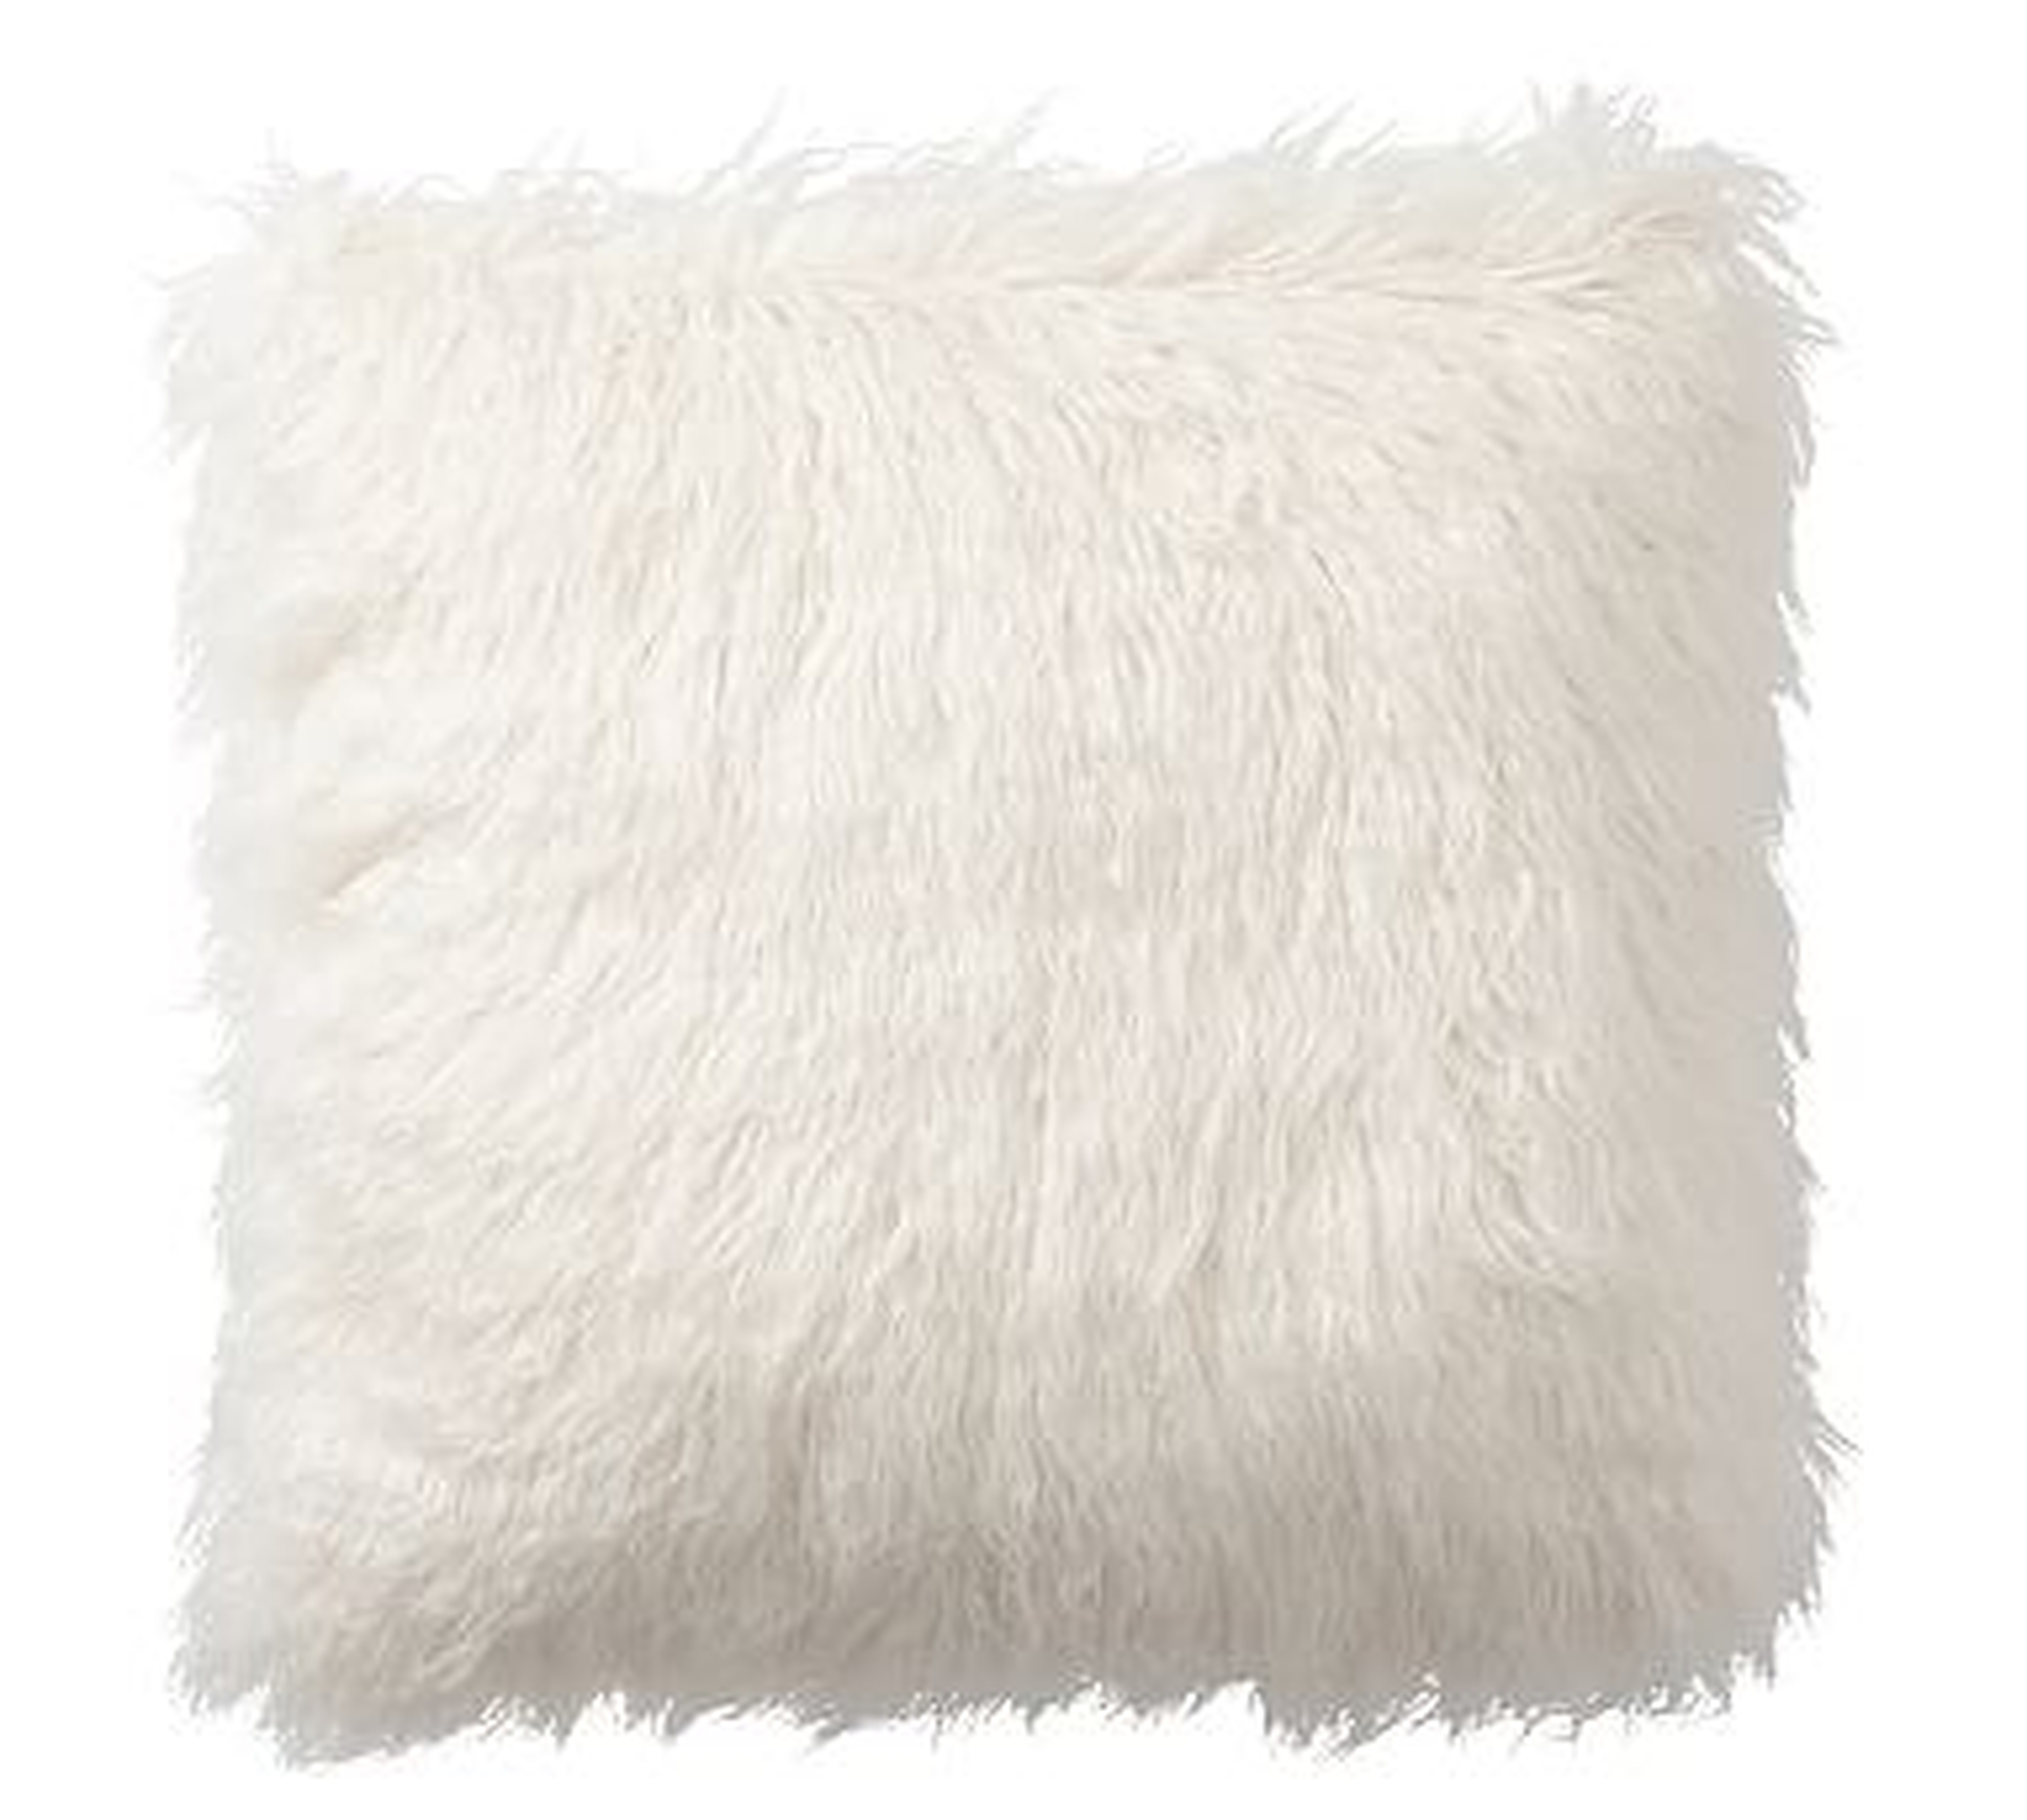 Mongolian Faux Fur Pillow Cover, 18", Ivory - Pottery Barn